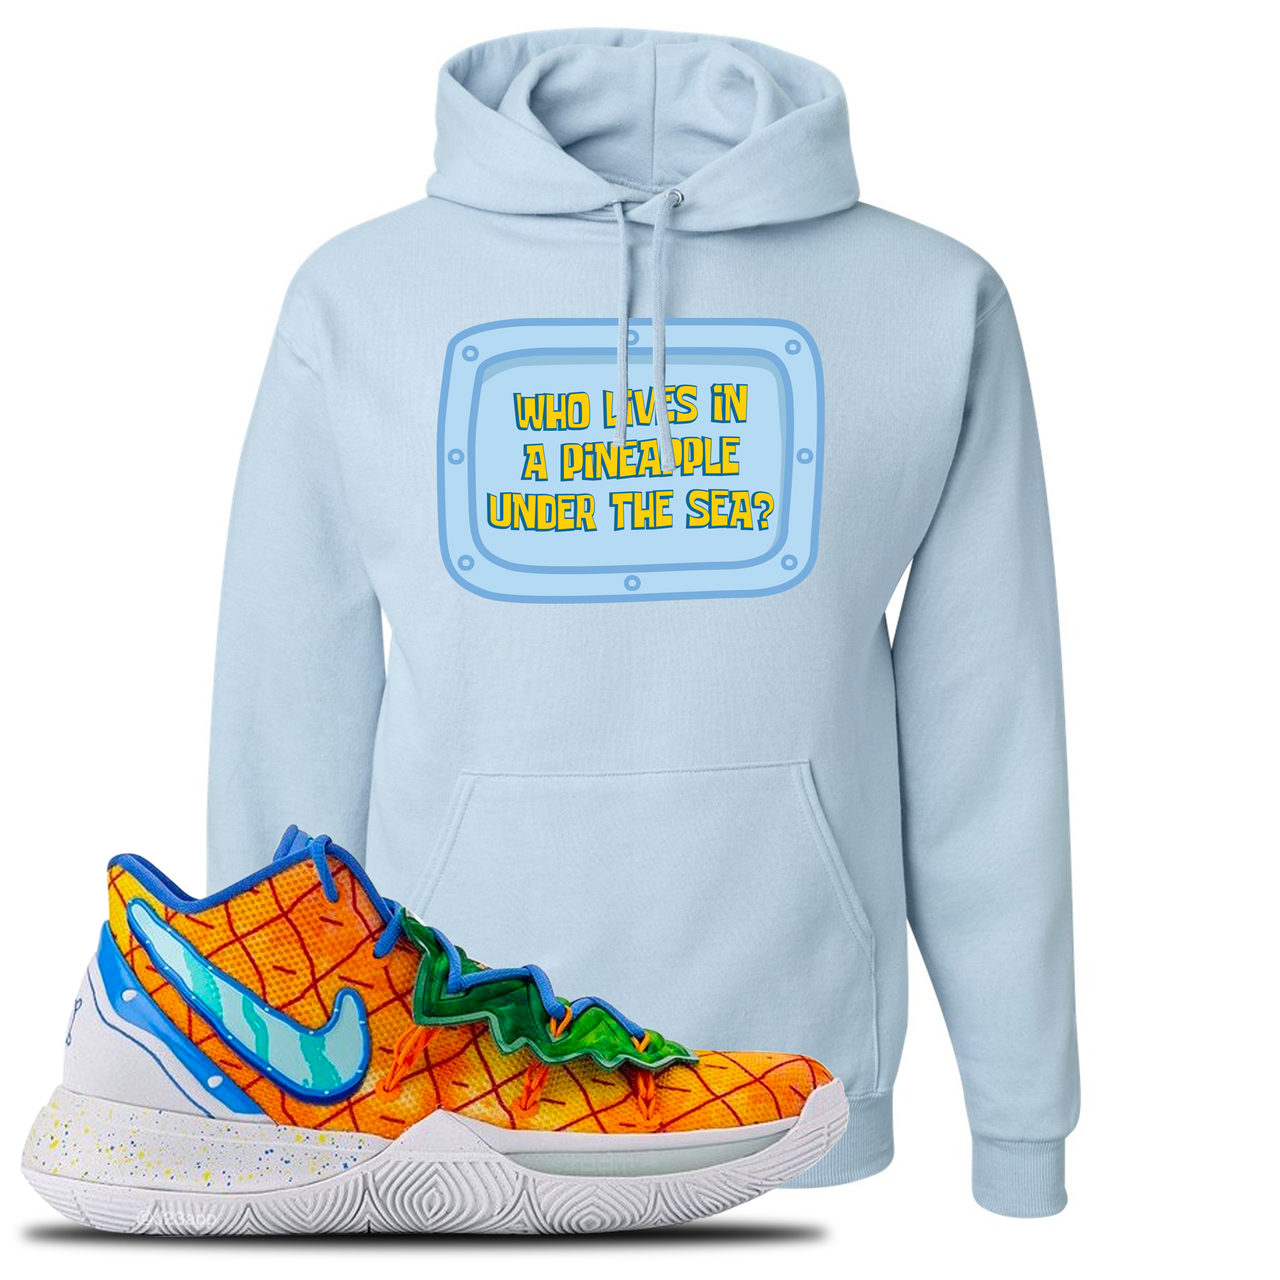 Kyrie 5 Pineapple House Who Lives in a Pineapple Under the Sea? Light Blue Sneaker Hook Up Pullover Hoodie